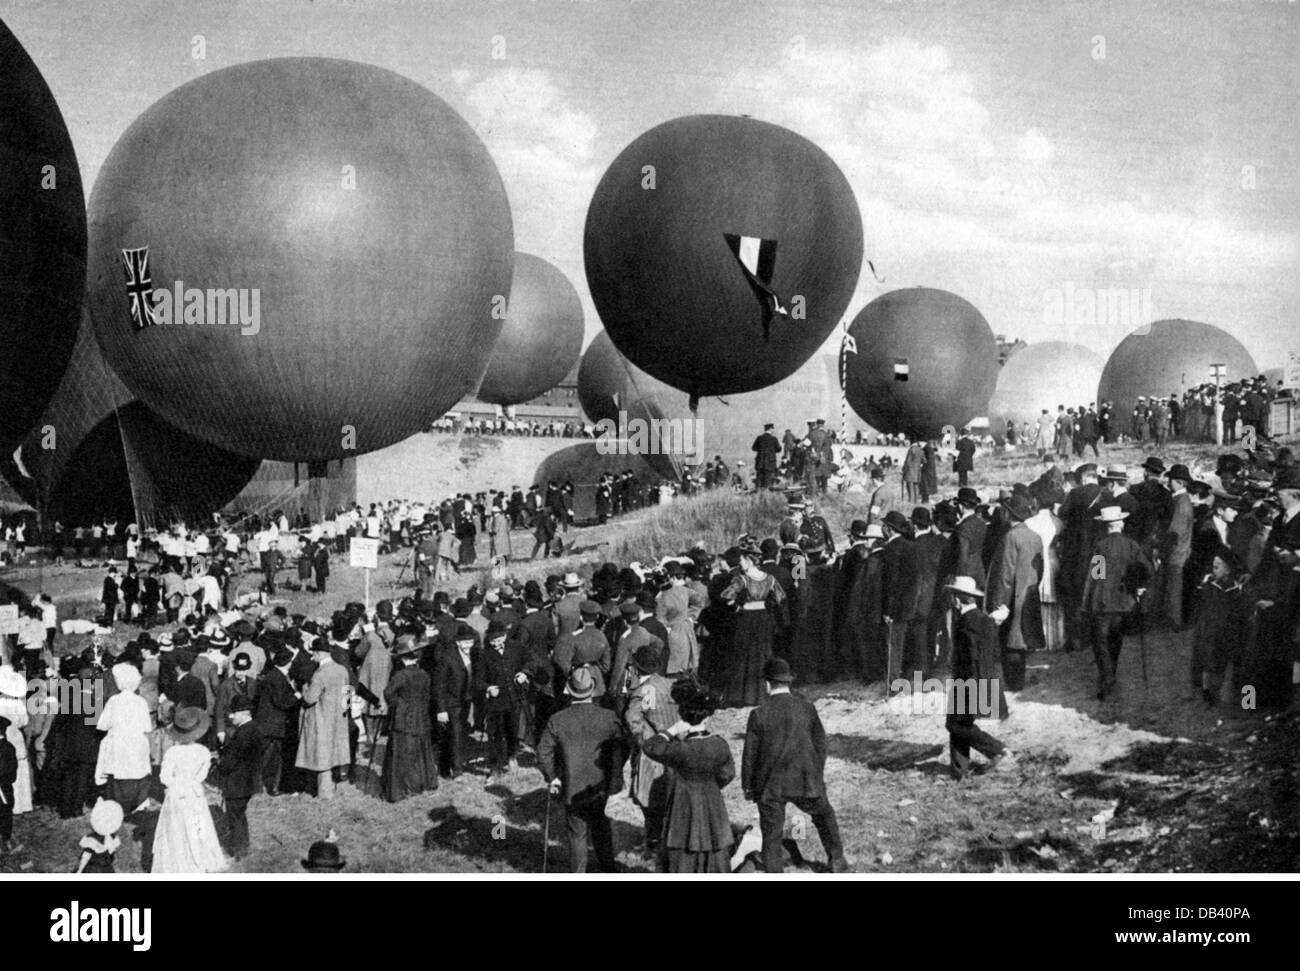 sport, ballooning, Gordon Bennett Cup 1908, start, Berlin, 11.10.1908, navigation, balloon, balloons, race, Germany, 20th century, historic, historical, people, 1900s, nostalgia, Additional-Rights-Clearences-Not Available Stock Photo